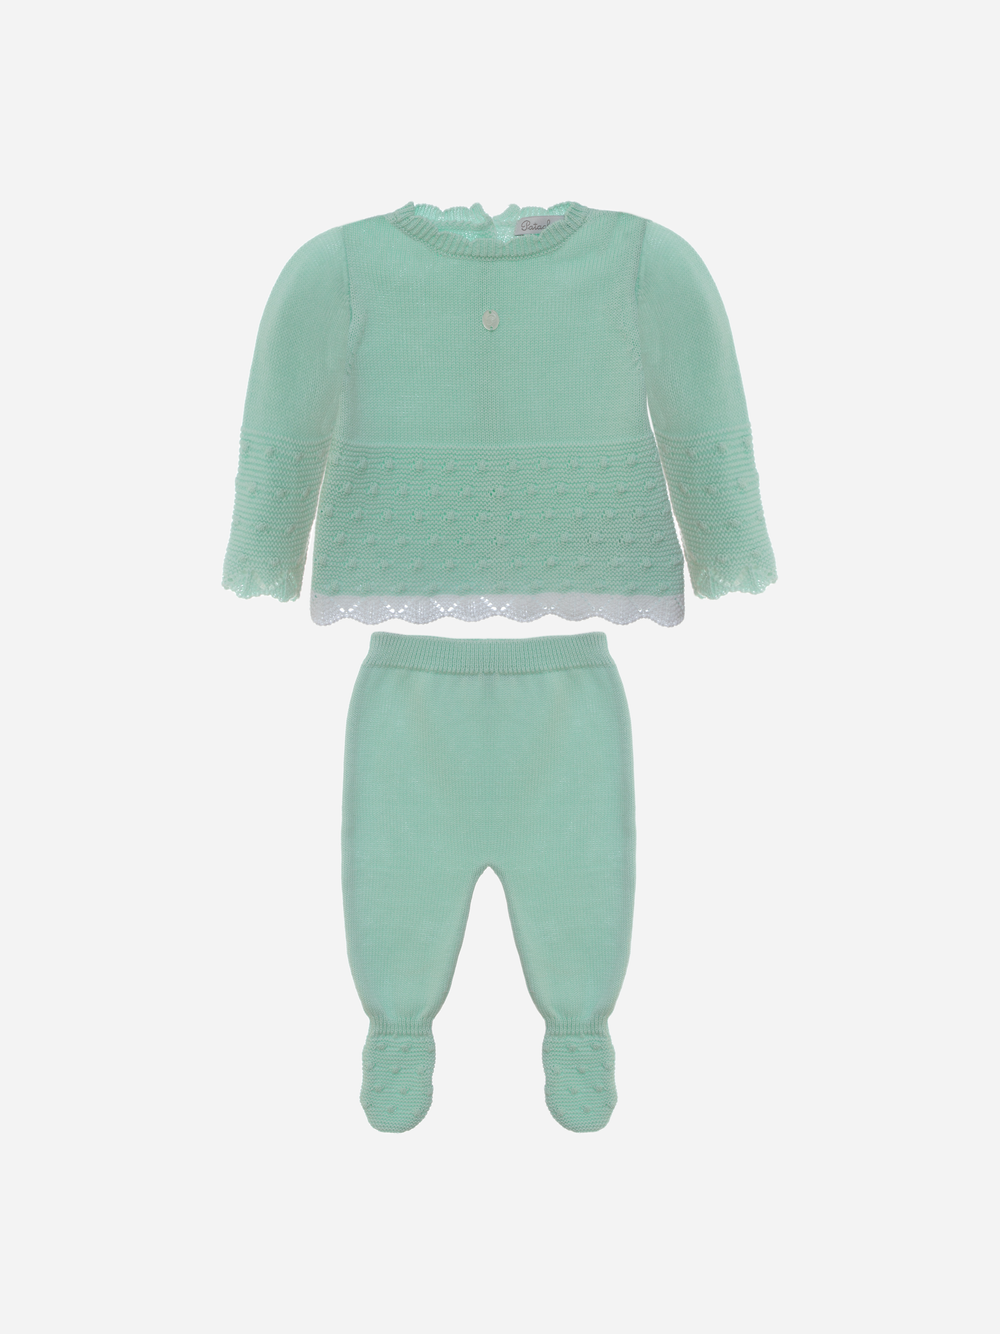 Girl's set in green water knit